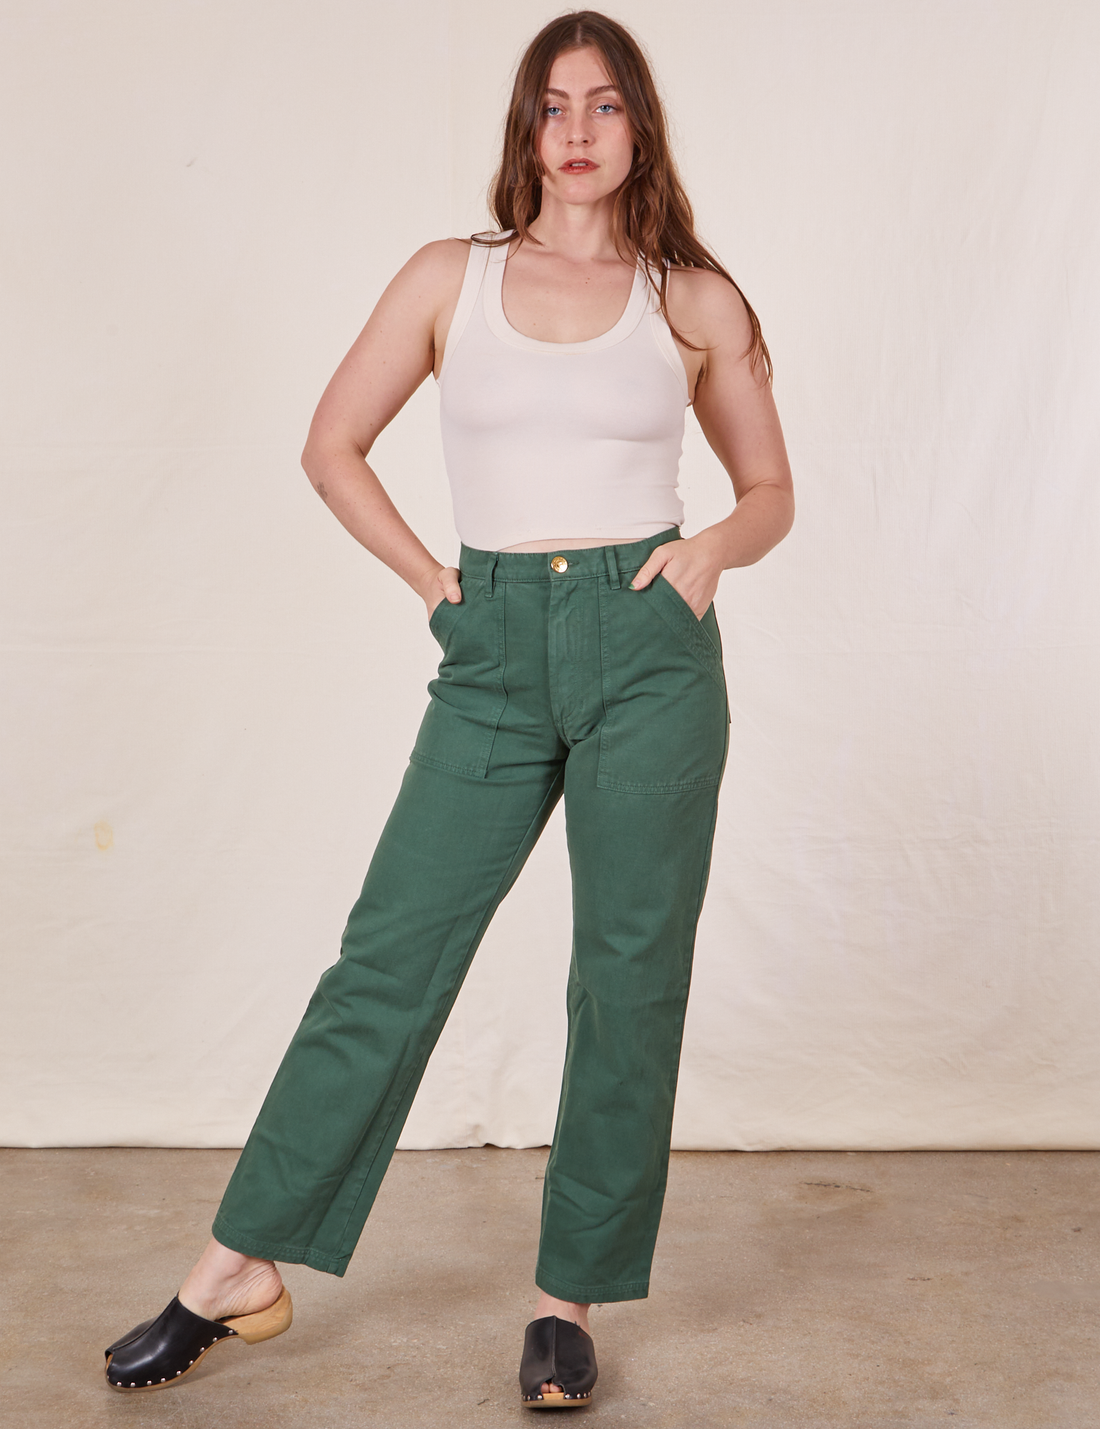 Allison is 5'10" and wearing Long S Work Pants in Dark Emerald Green paired with vintage off-white Tank Top